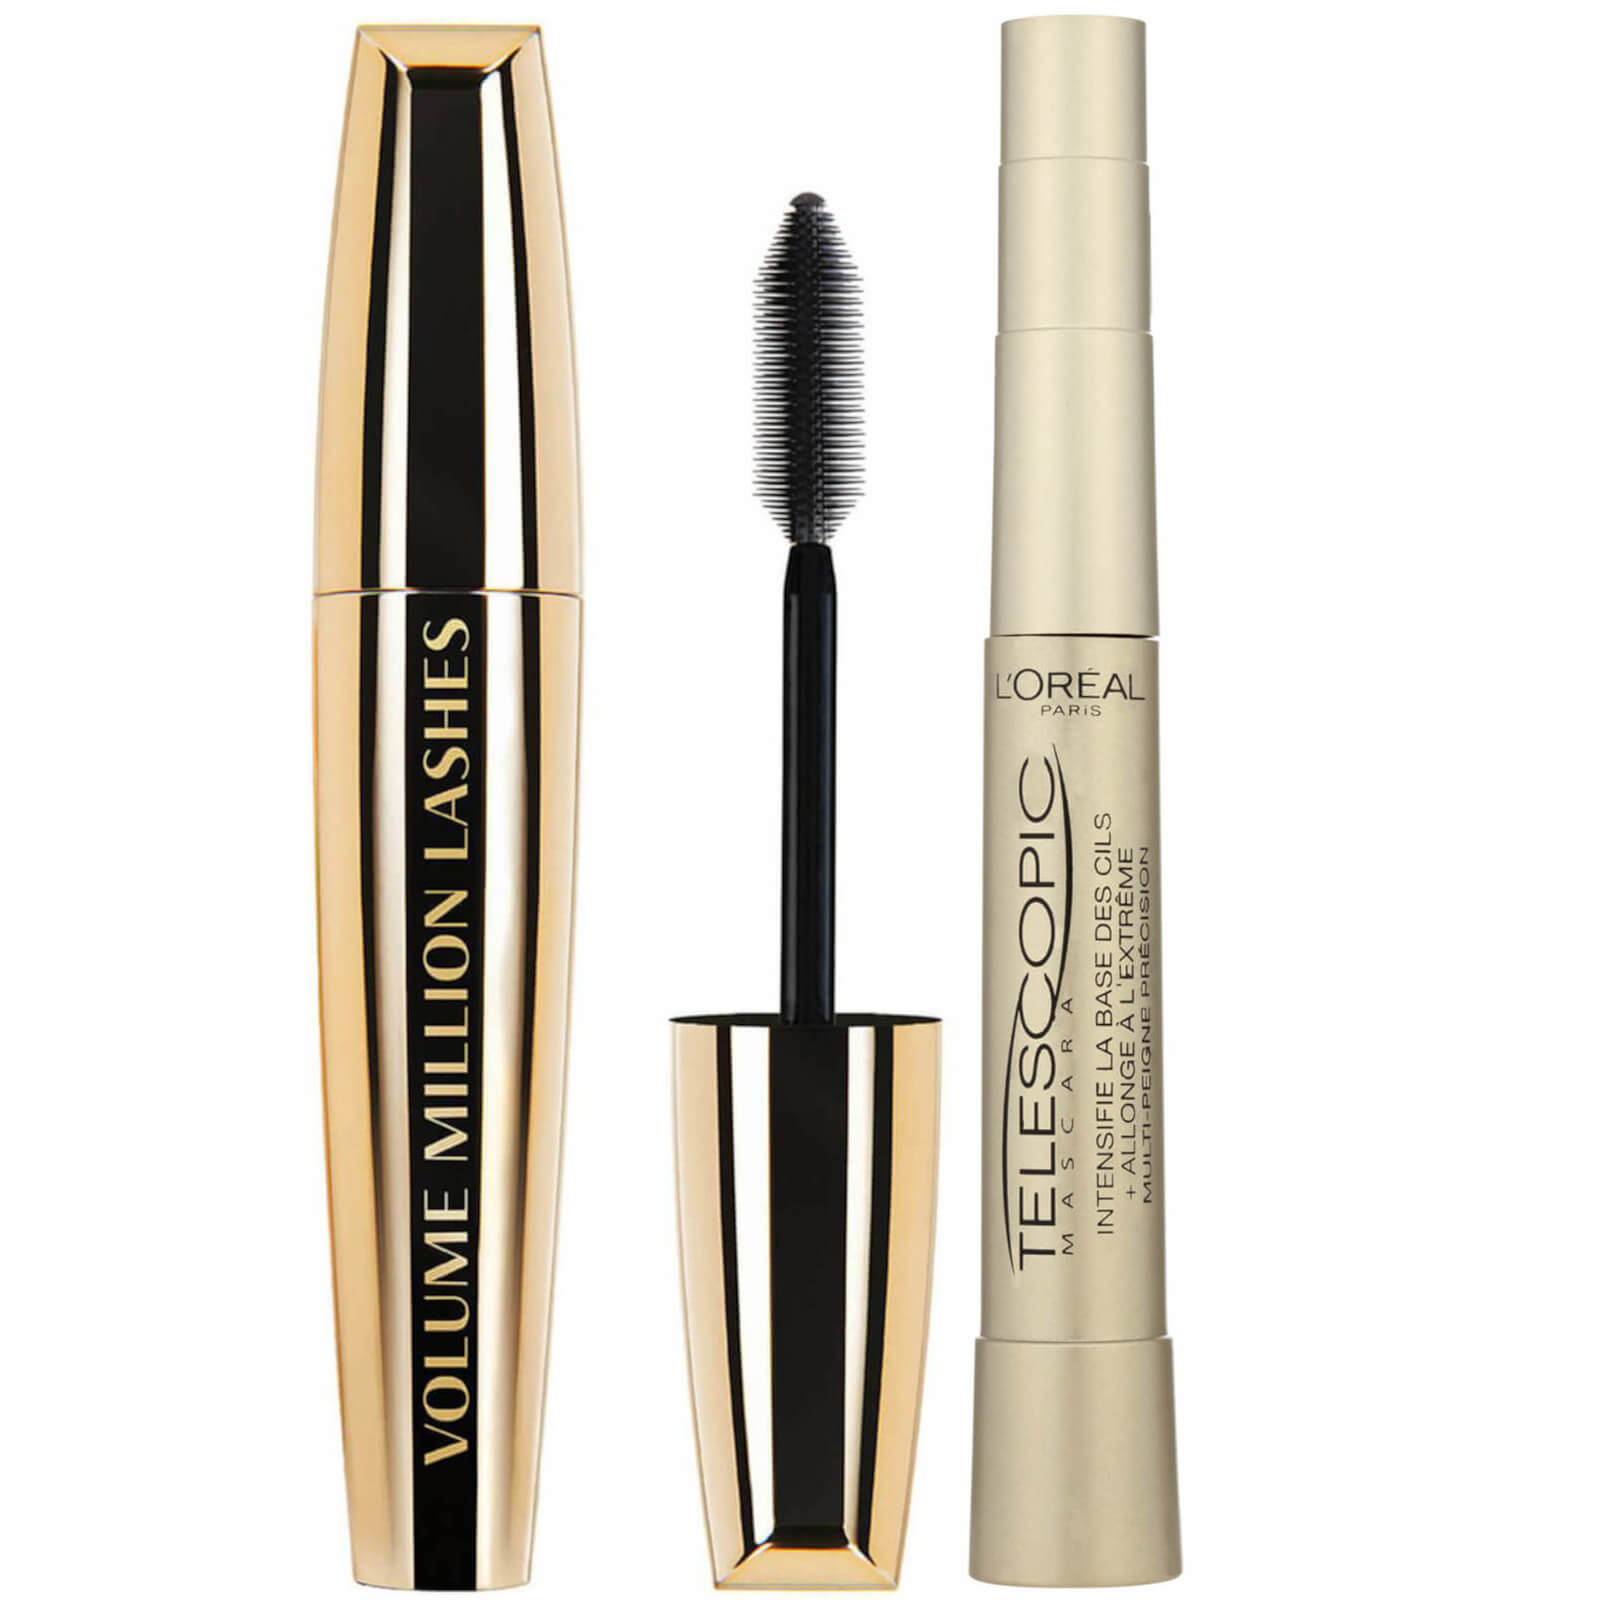 Image of L'Oréal Paris Telescopic Mascara for More Length and Volume and Million Lashes Volume Mascara Bundle